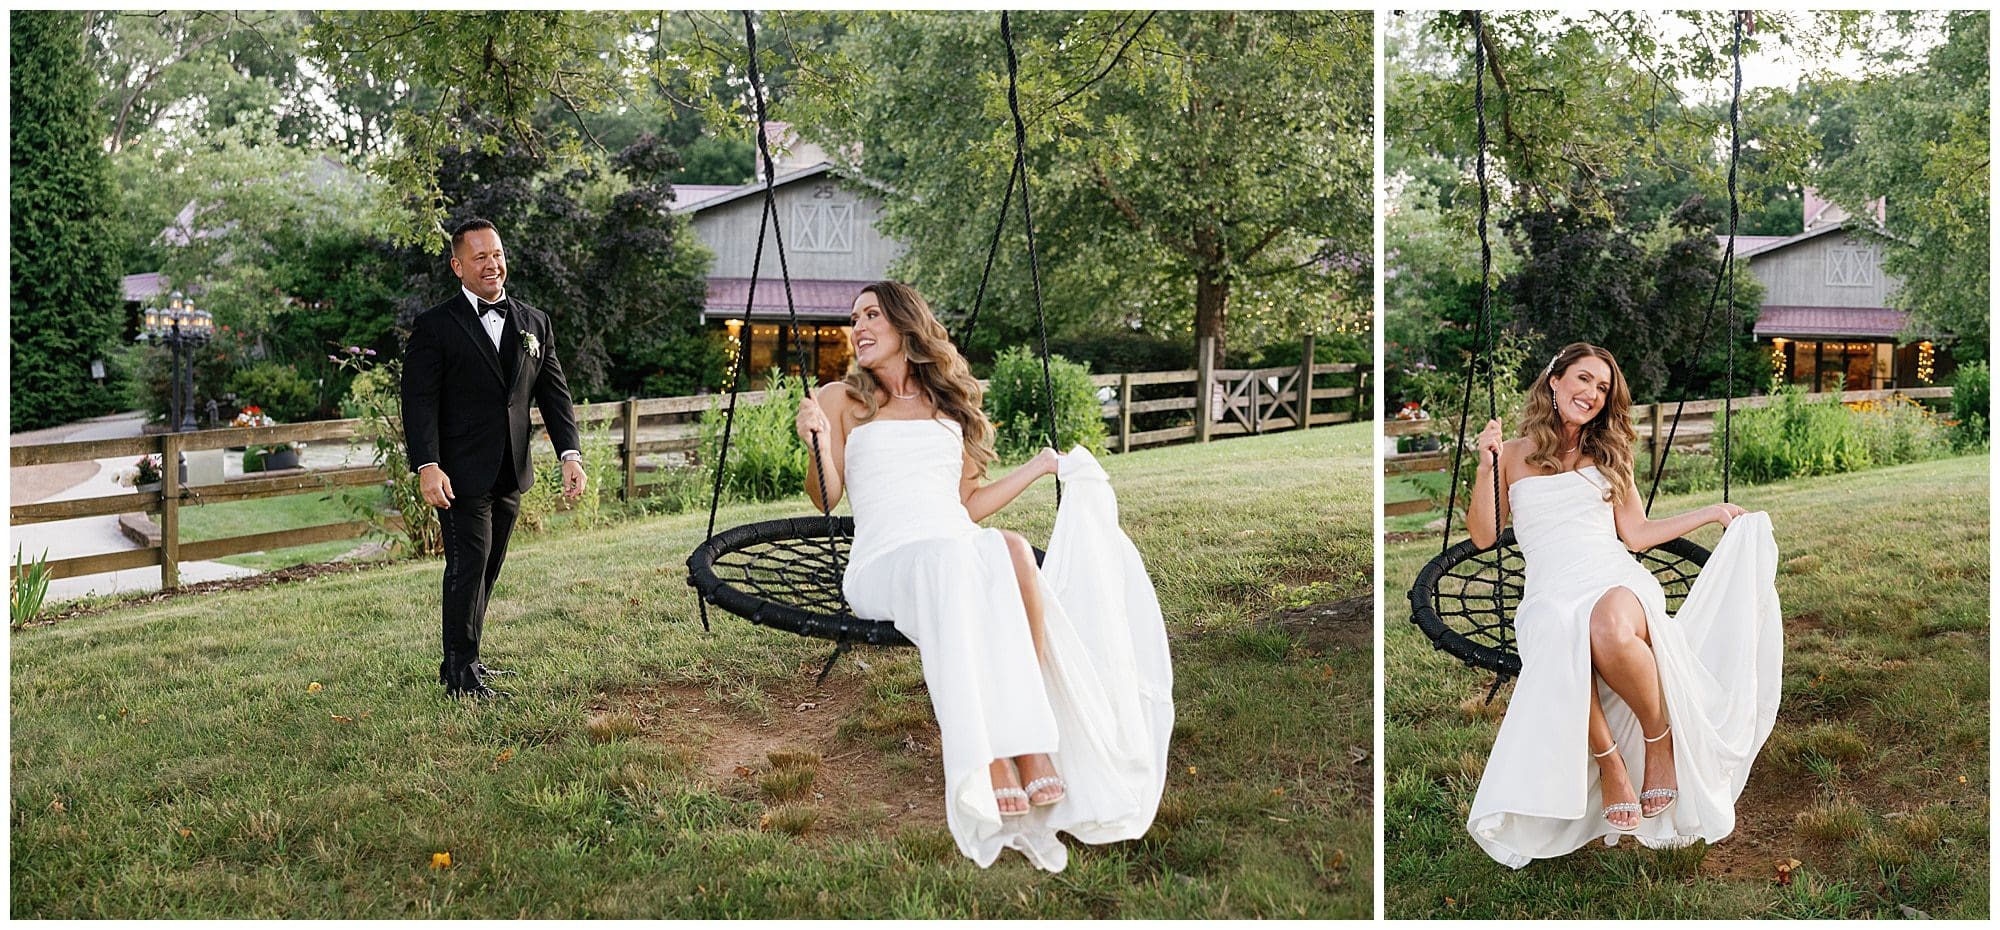 joyful photos of bride on swing at wedding with the groom pushing her